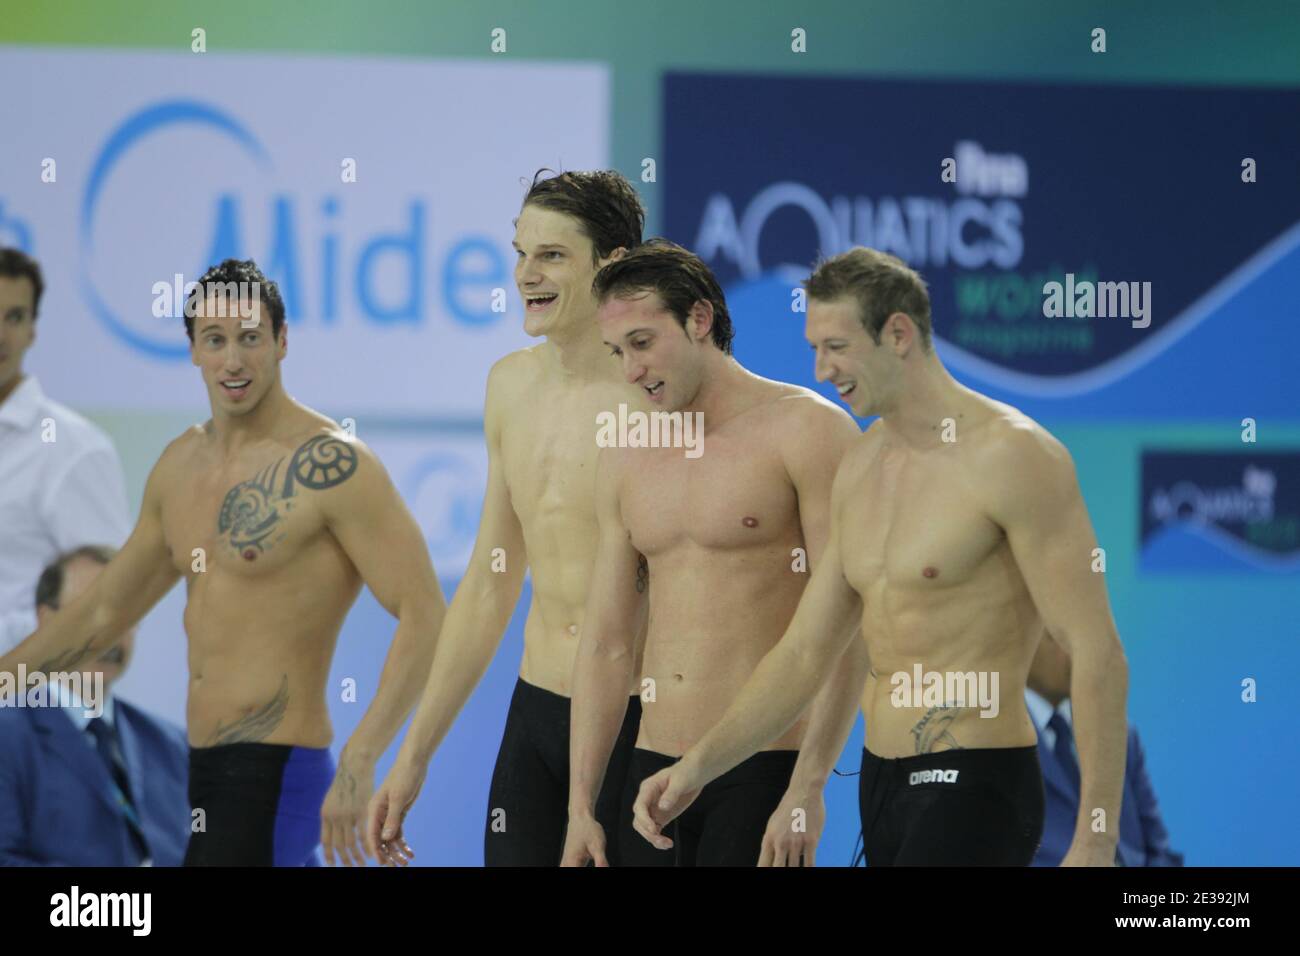 Alain Bernard, Frederick Bousquet, Fabien Gilot and Yannick Agnel of France celebrate after winning the Gold medals in the Men's 4Ax100m Freestyle final during day one of the 10th FINA World Swimming Championships (25m) at the Hamdan bin Mohammed bin Rashid Sports Complex in Dubai, United Arab Emirates on December 15, 2010. Photo by Ammar Abd Rabbo/ABACAPRESS.COM Stock Photo